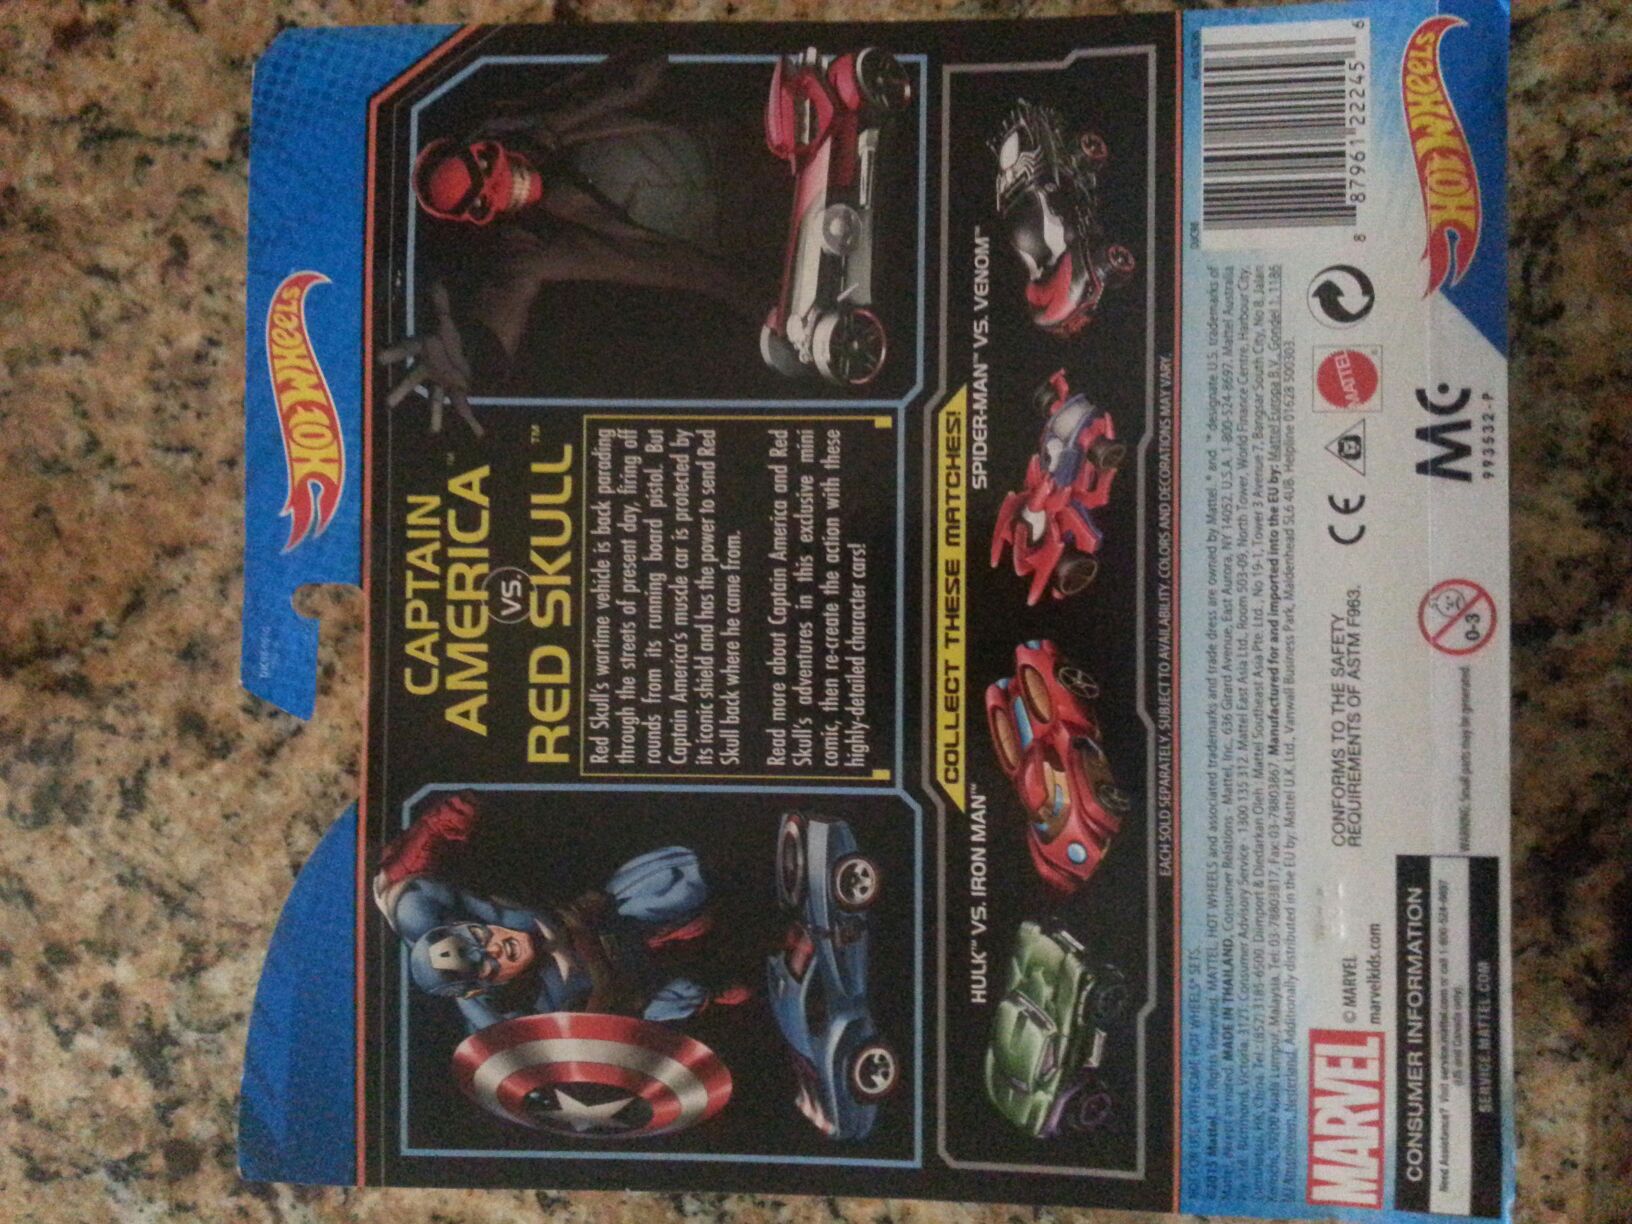 captian America vs red skull  toy car collectible - Main Image 2